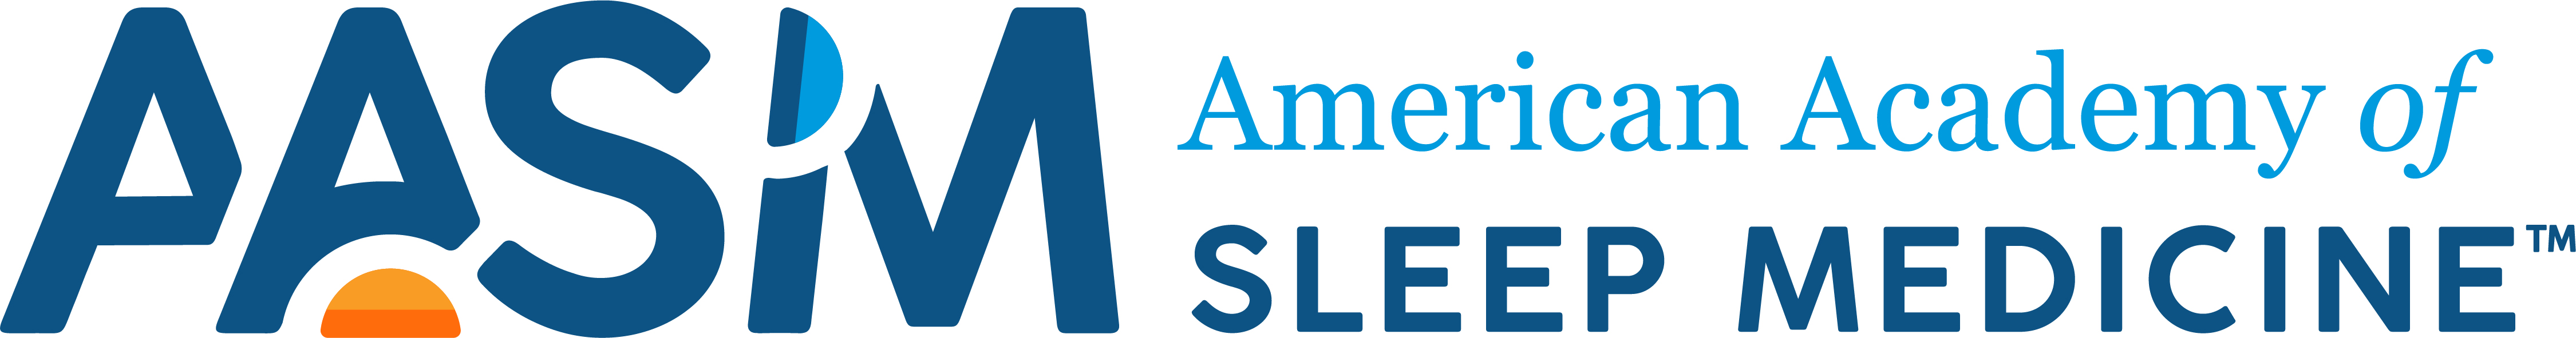 American Academy of Sleep Medicine continues to oppose permanent daylight saving time bill